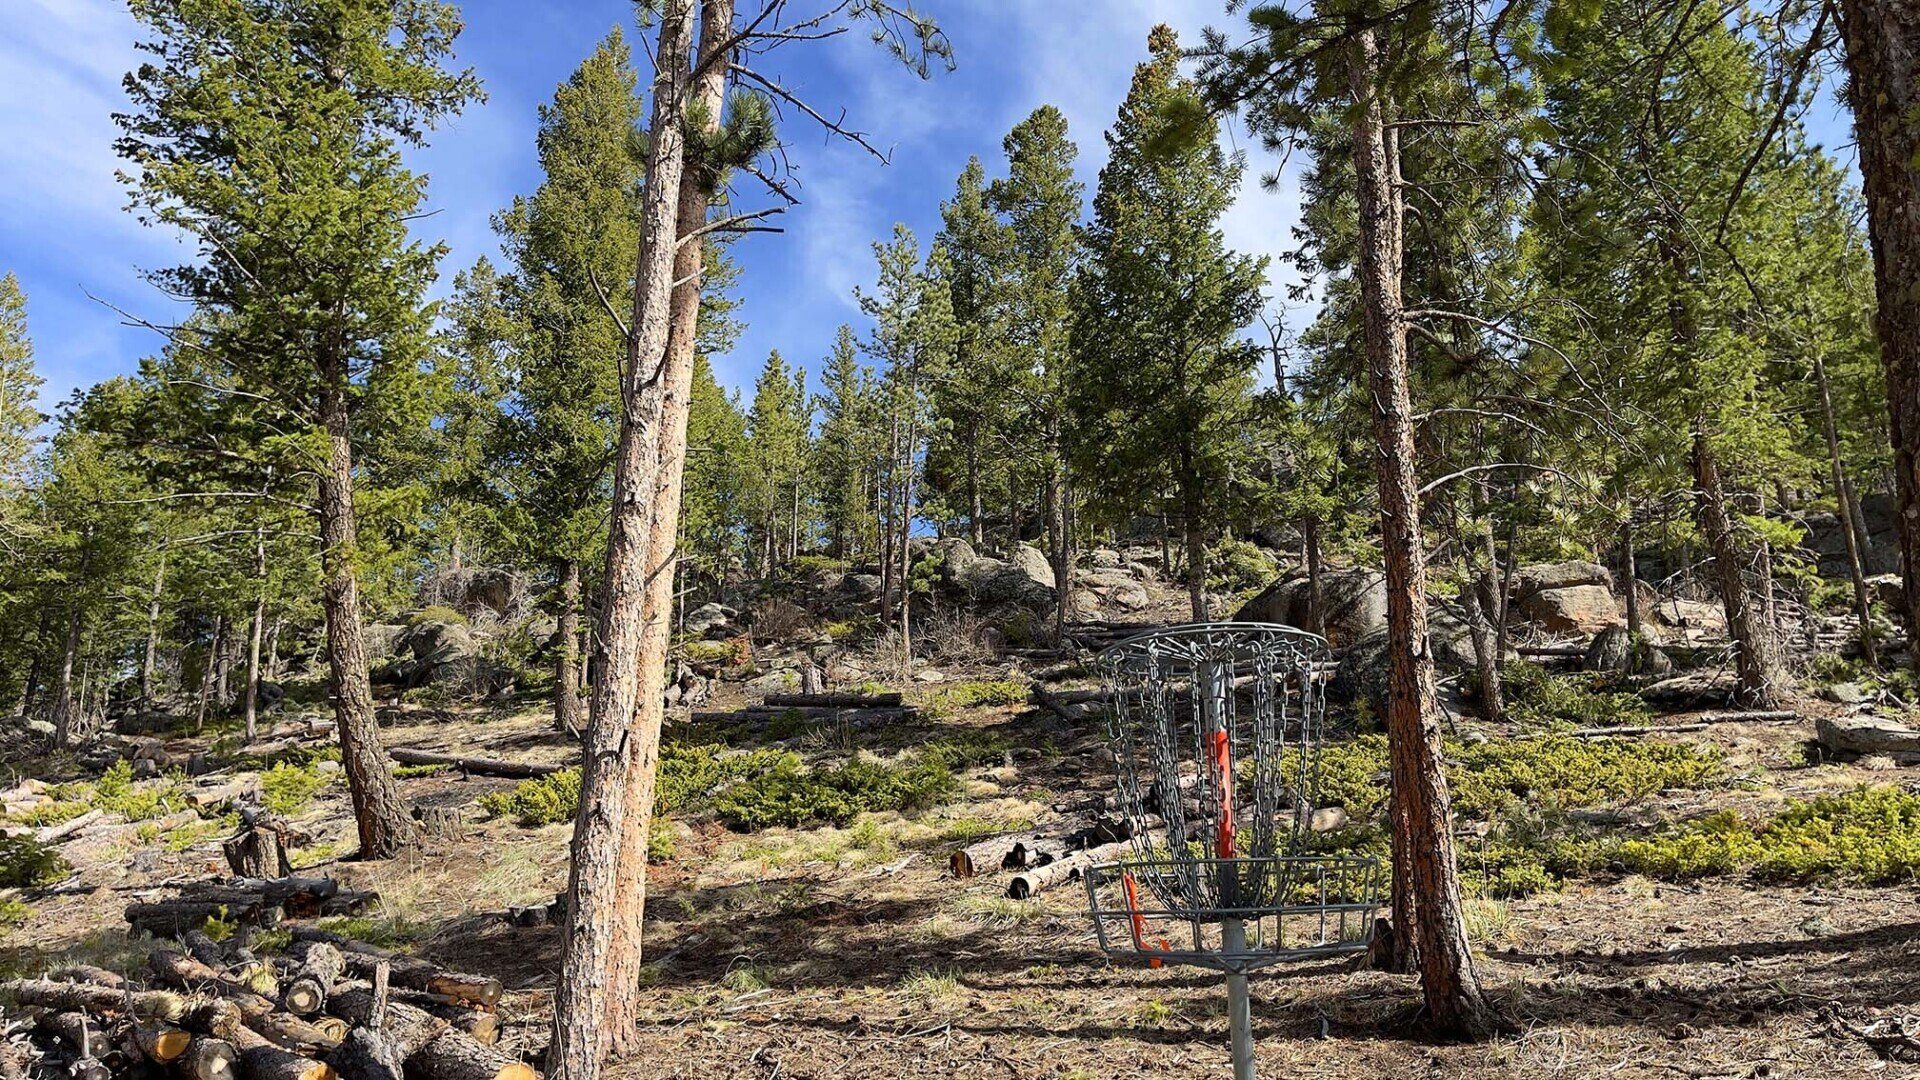 New disc golf hole 6's basket at Sundance Trail Guest Ranch May 2022